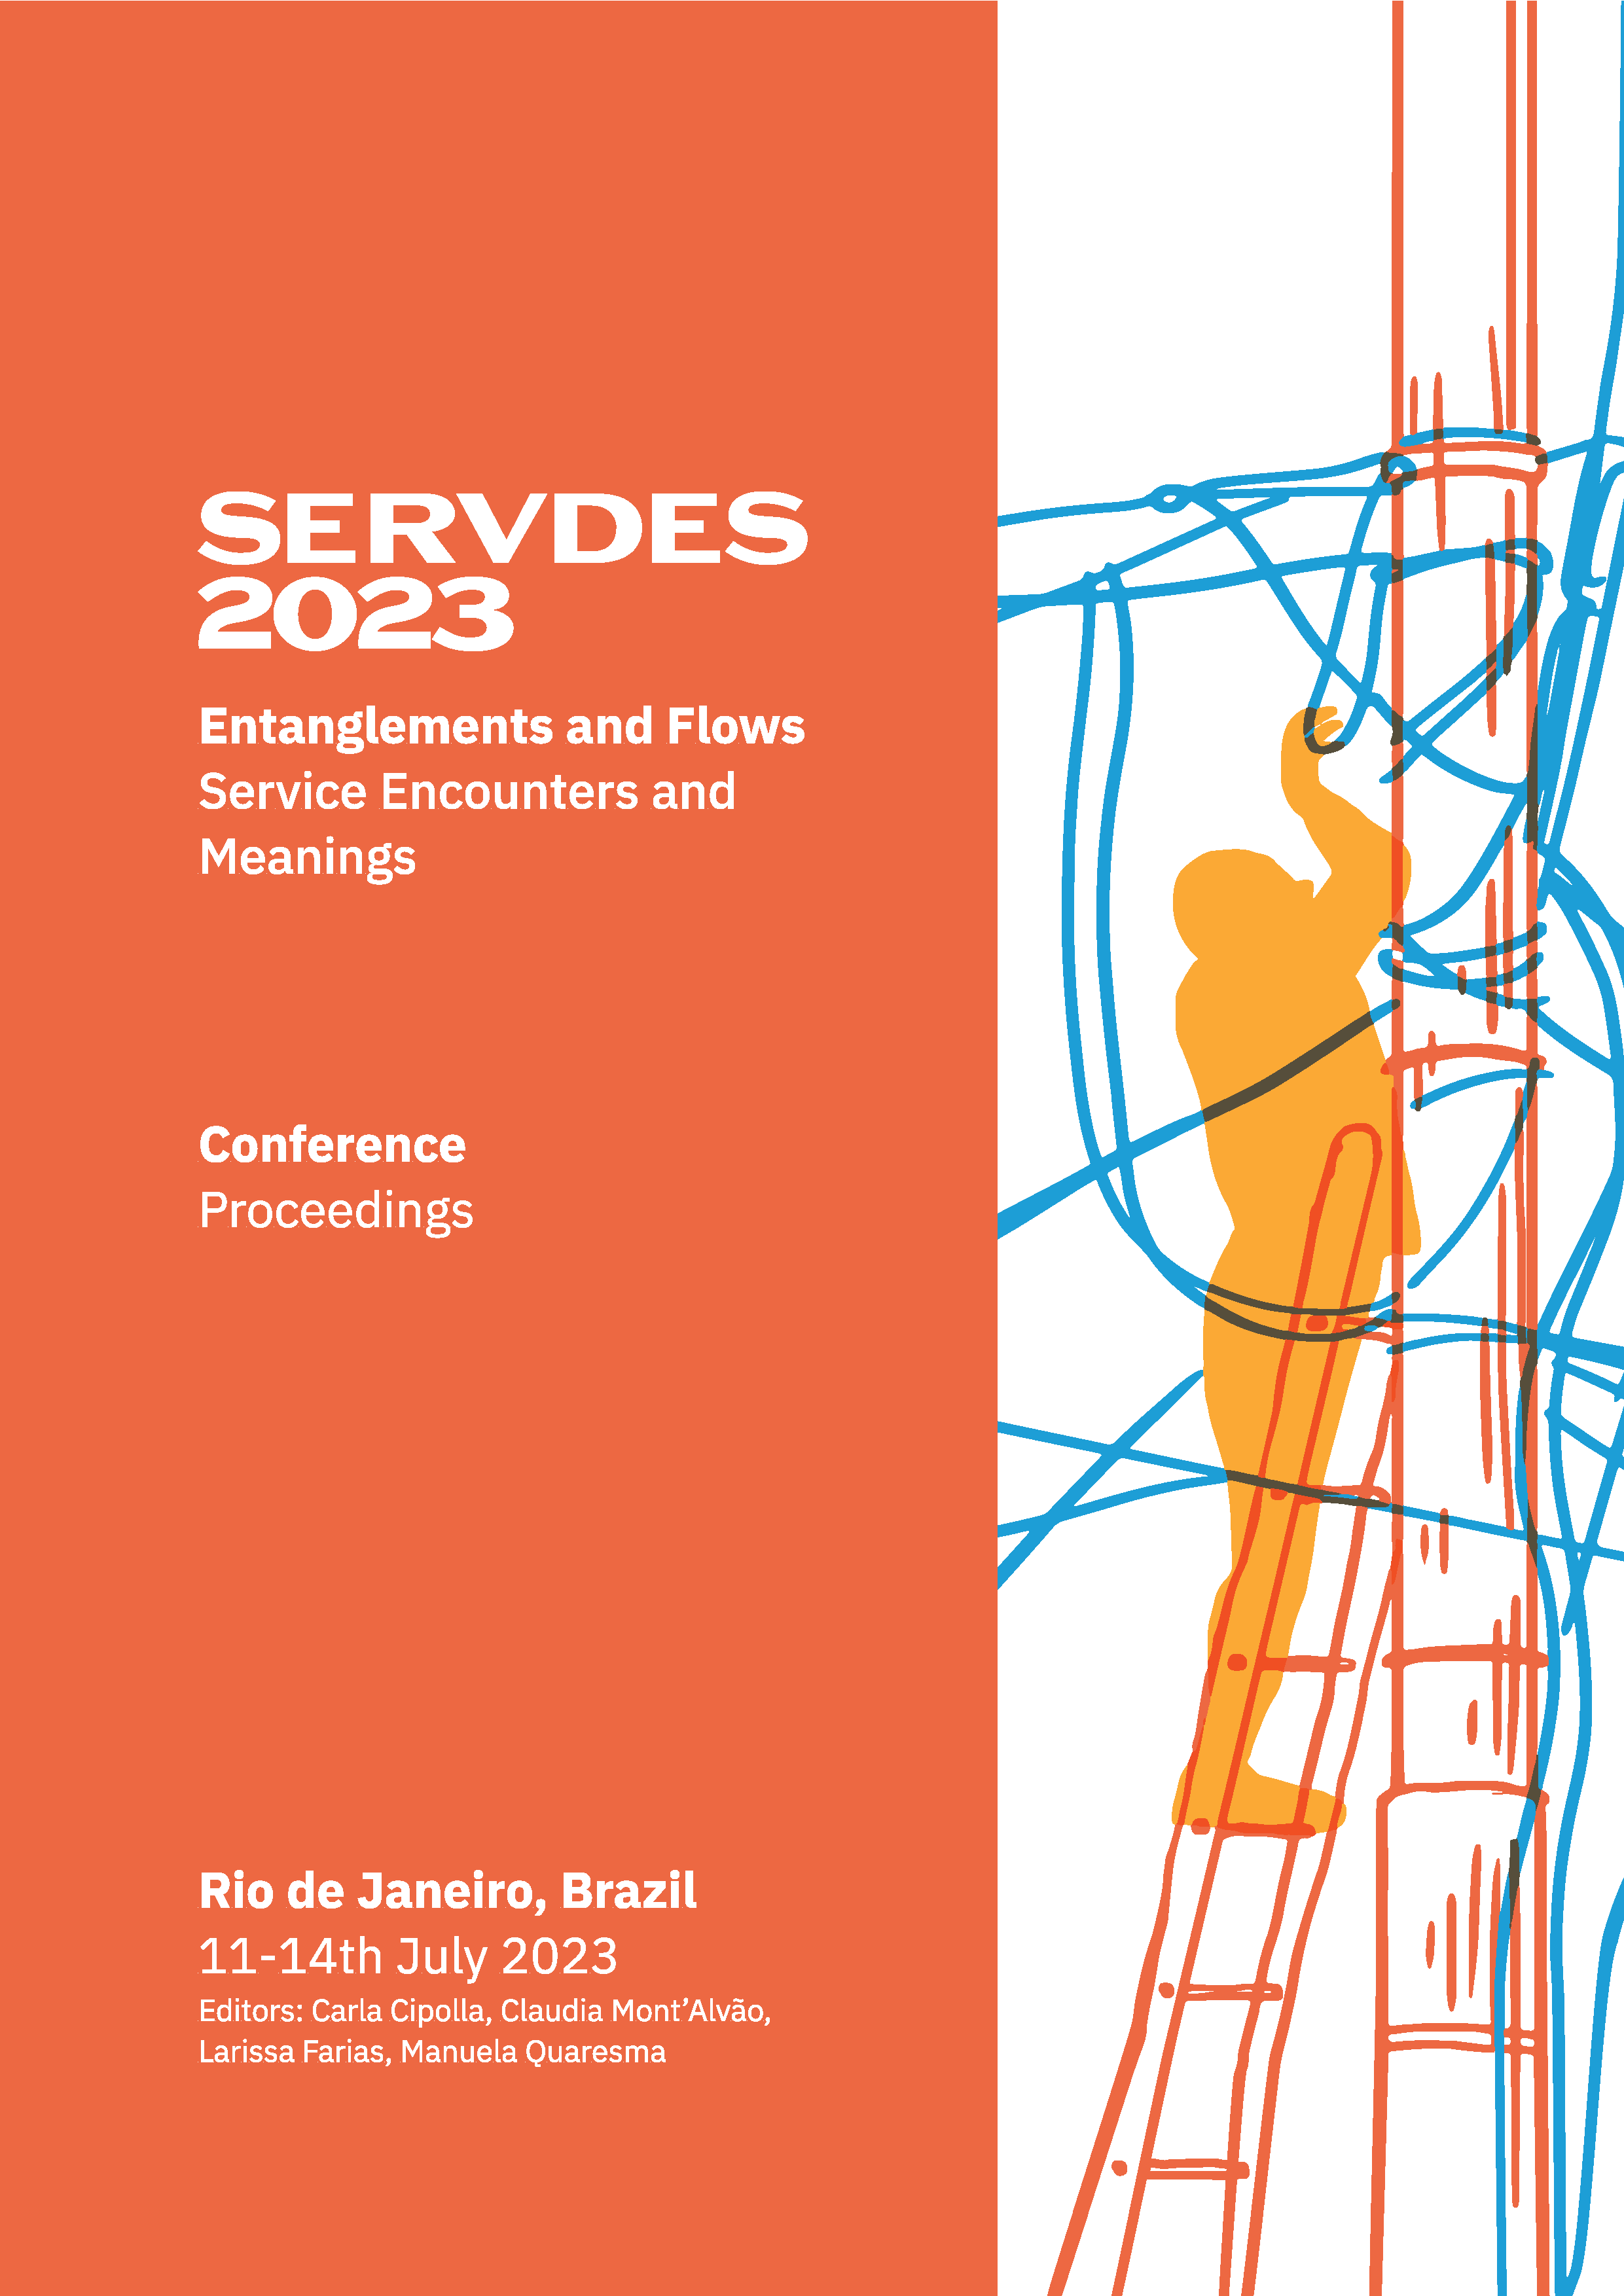 					View ServDes.2023 Entanglements & Flows Conference: Service Encounters and Meanings Proceedings, 11-14th July 2023, Rio de Janeiro, Brazil
				